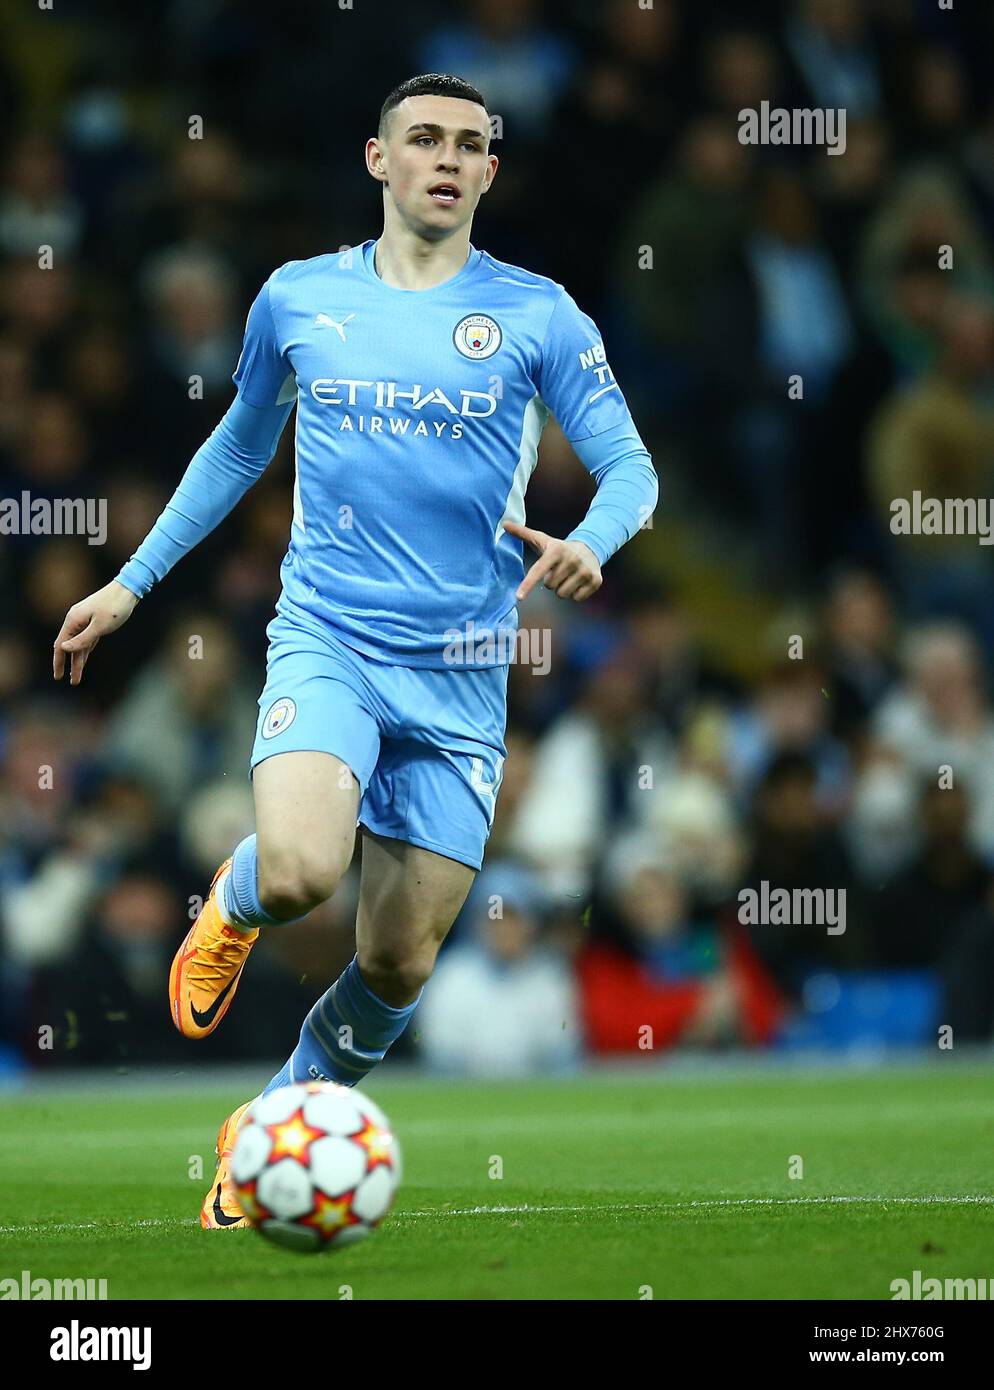 Manchester, UK. 09/03/2022, Phil Foden of Manchester City during the Manchester City vs Sporting Lisbon football match, UEFA Champions League, Round of 16, Leg 2 of 2, Etihad Stadium, Manchester, UK. 9th March 2022. Credit: Michael Zemanek/Alamy Live News Stock Photo